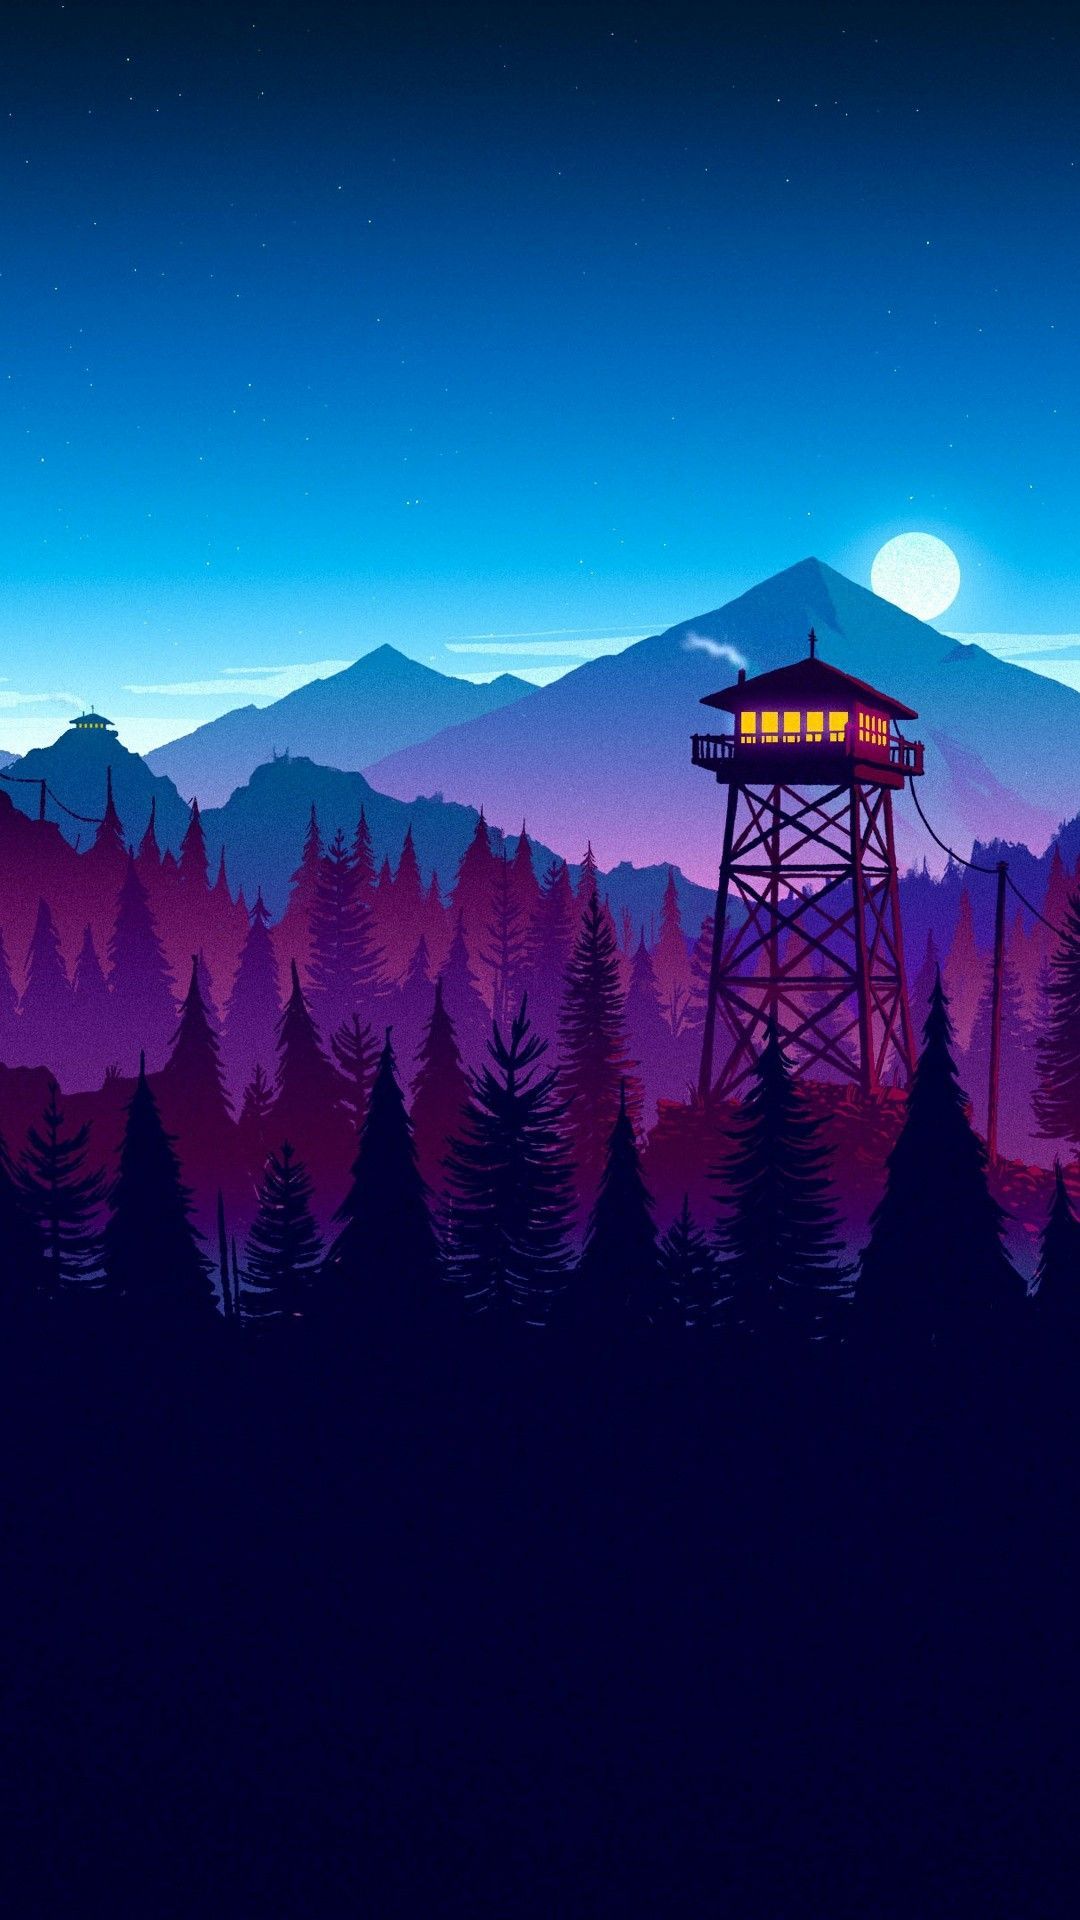 Aesthetic Cartoon Mountain View Wallpapers - Wallpaper Cave